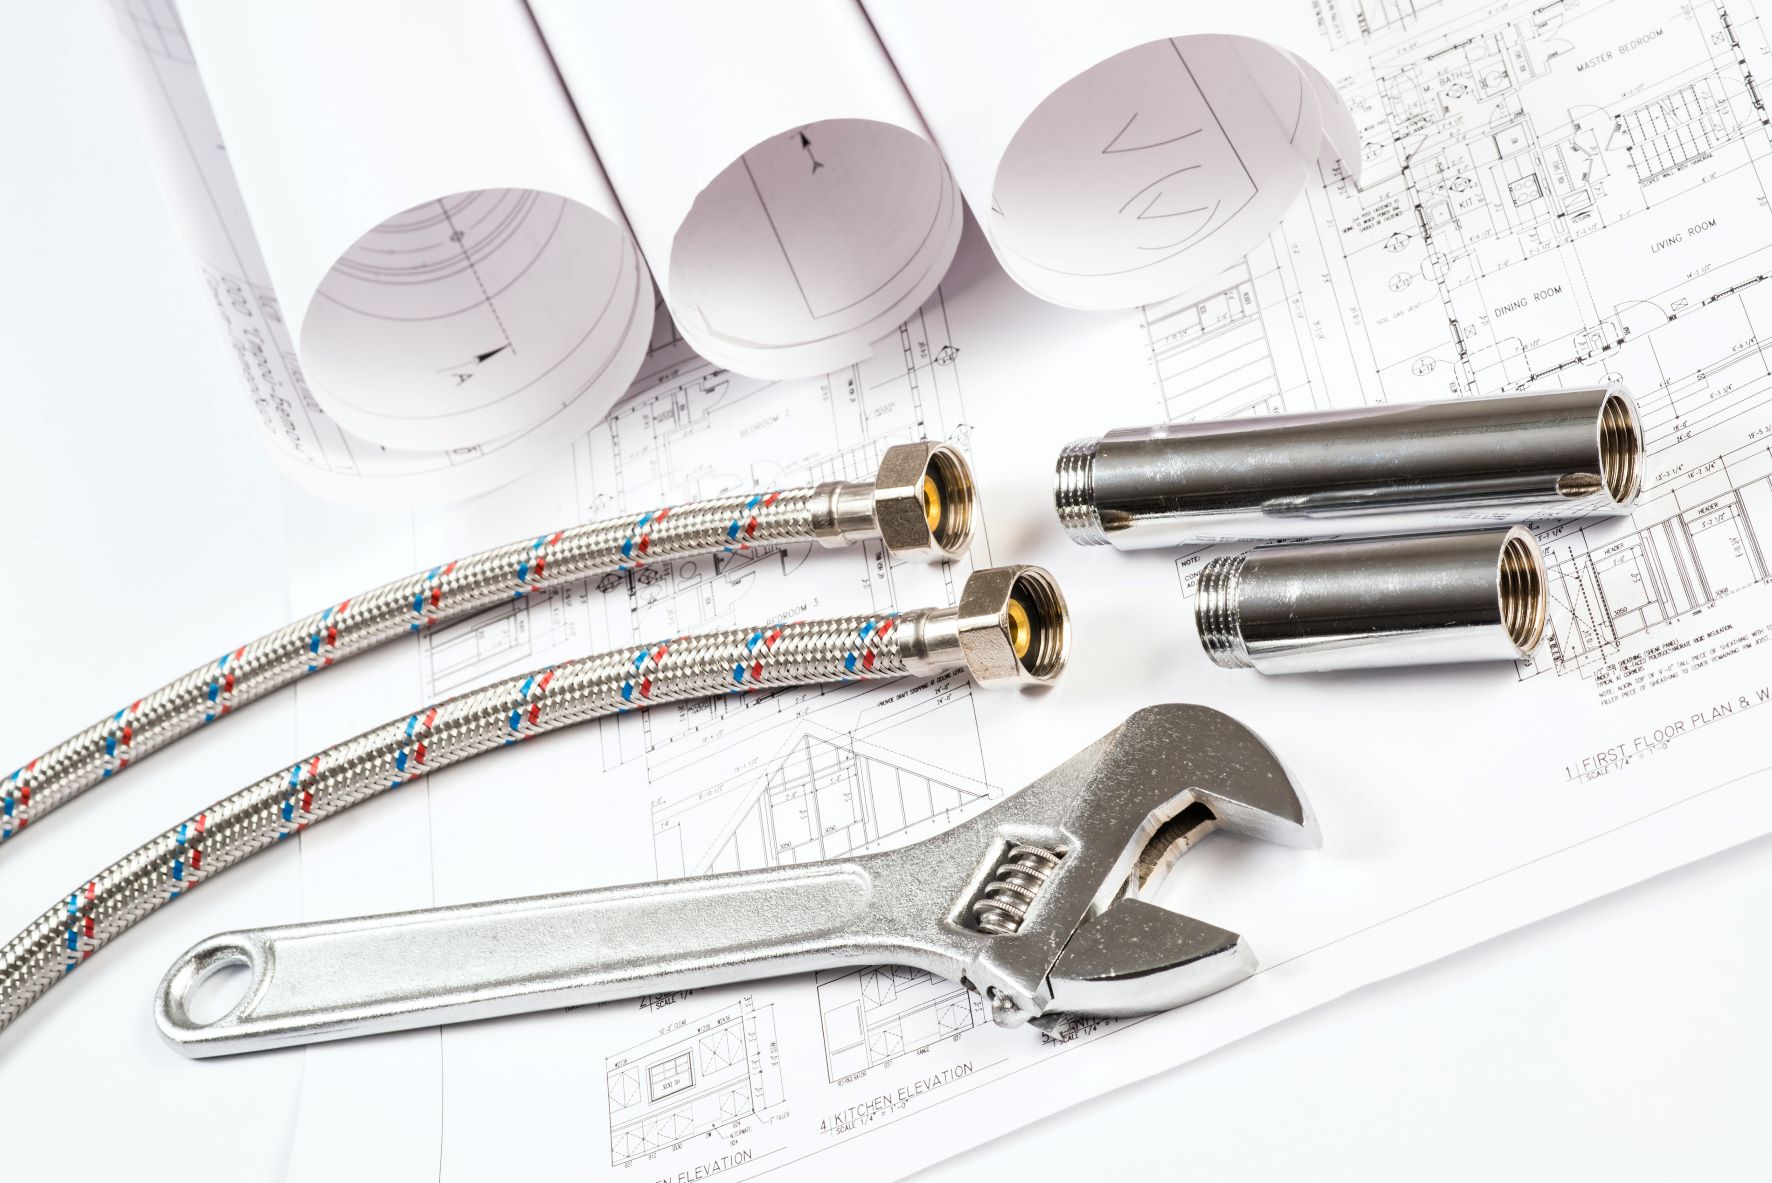 What are the do’s and don’ts of plumbing